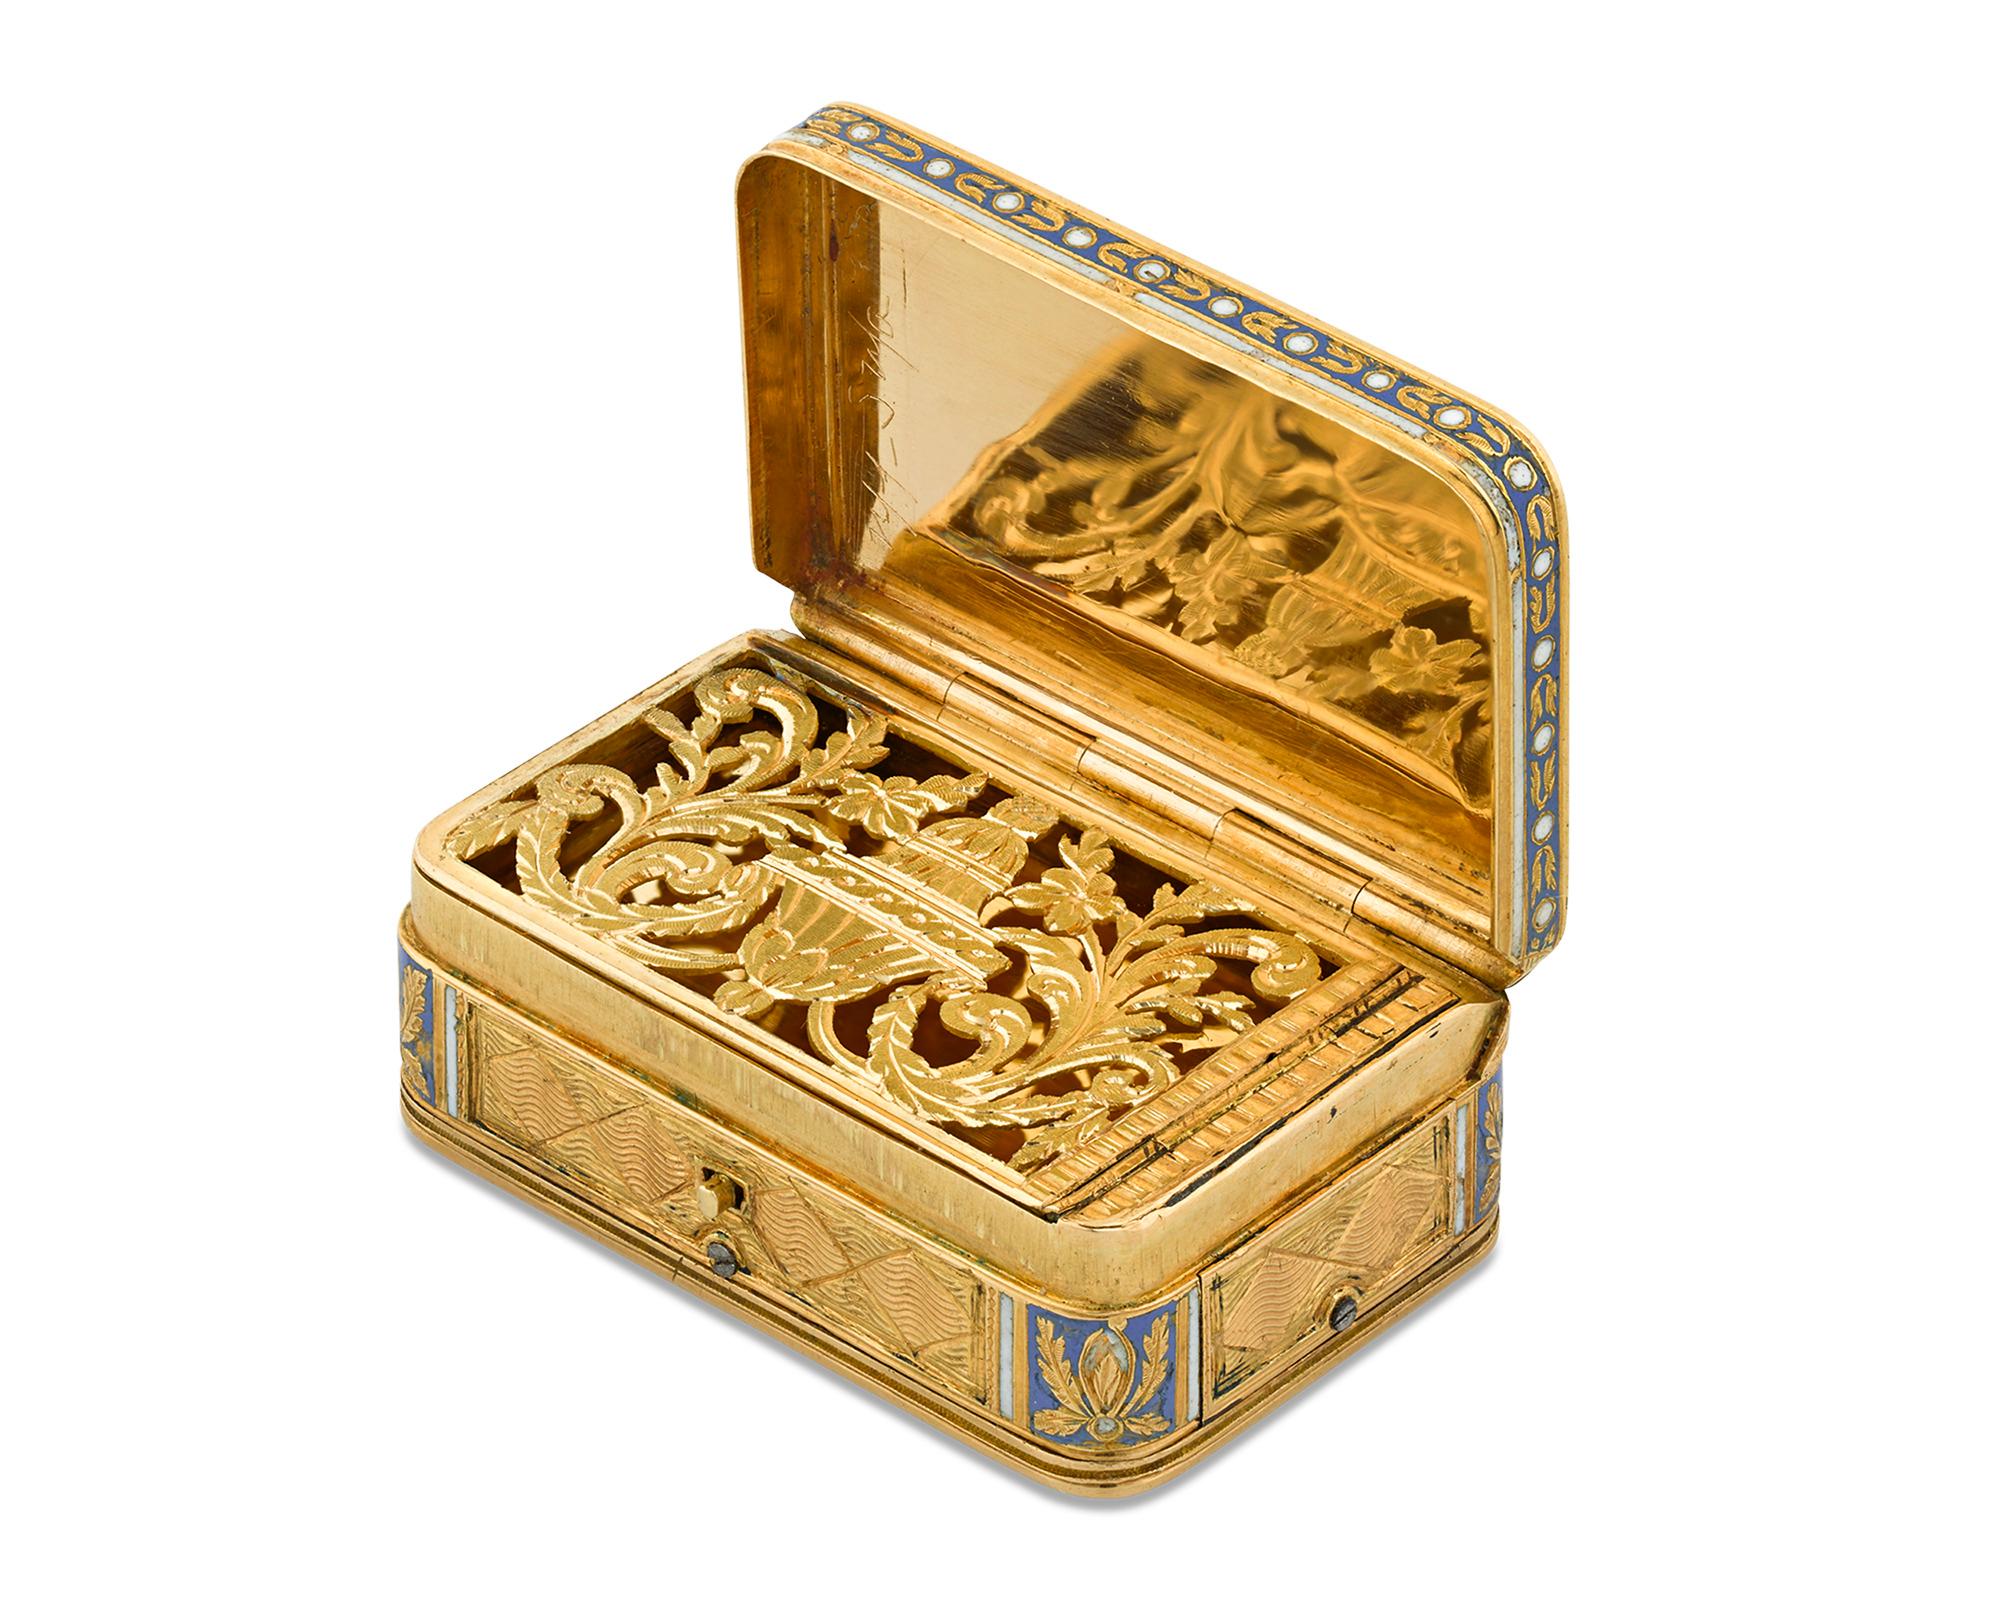 A musical movement distinguishes this wonderful early 19th-century gold vinaigrette box. The vessel is covered in delicate engraving highlighted by blue and white champlevé enamel detailed in a fine floral motif. The button on the front of the box